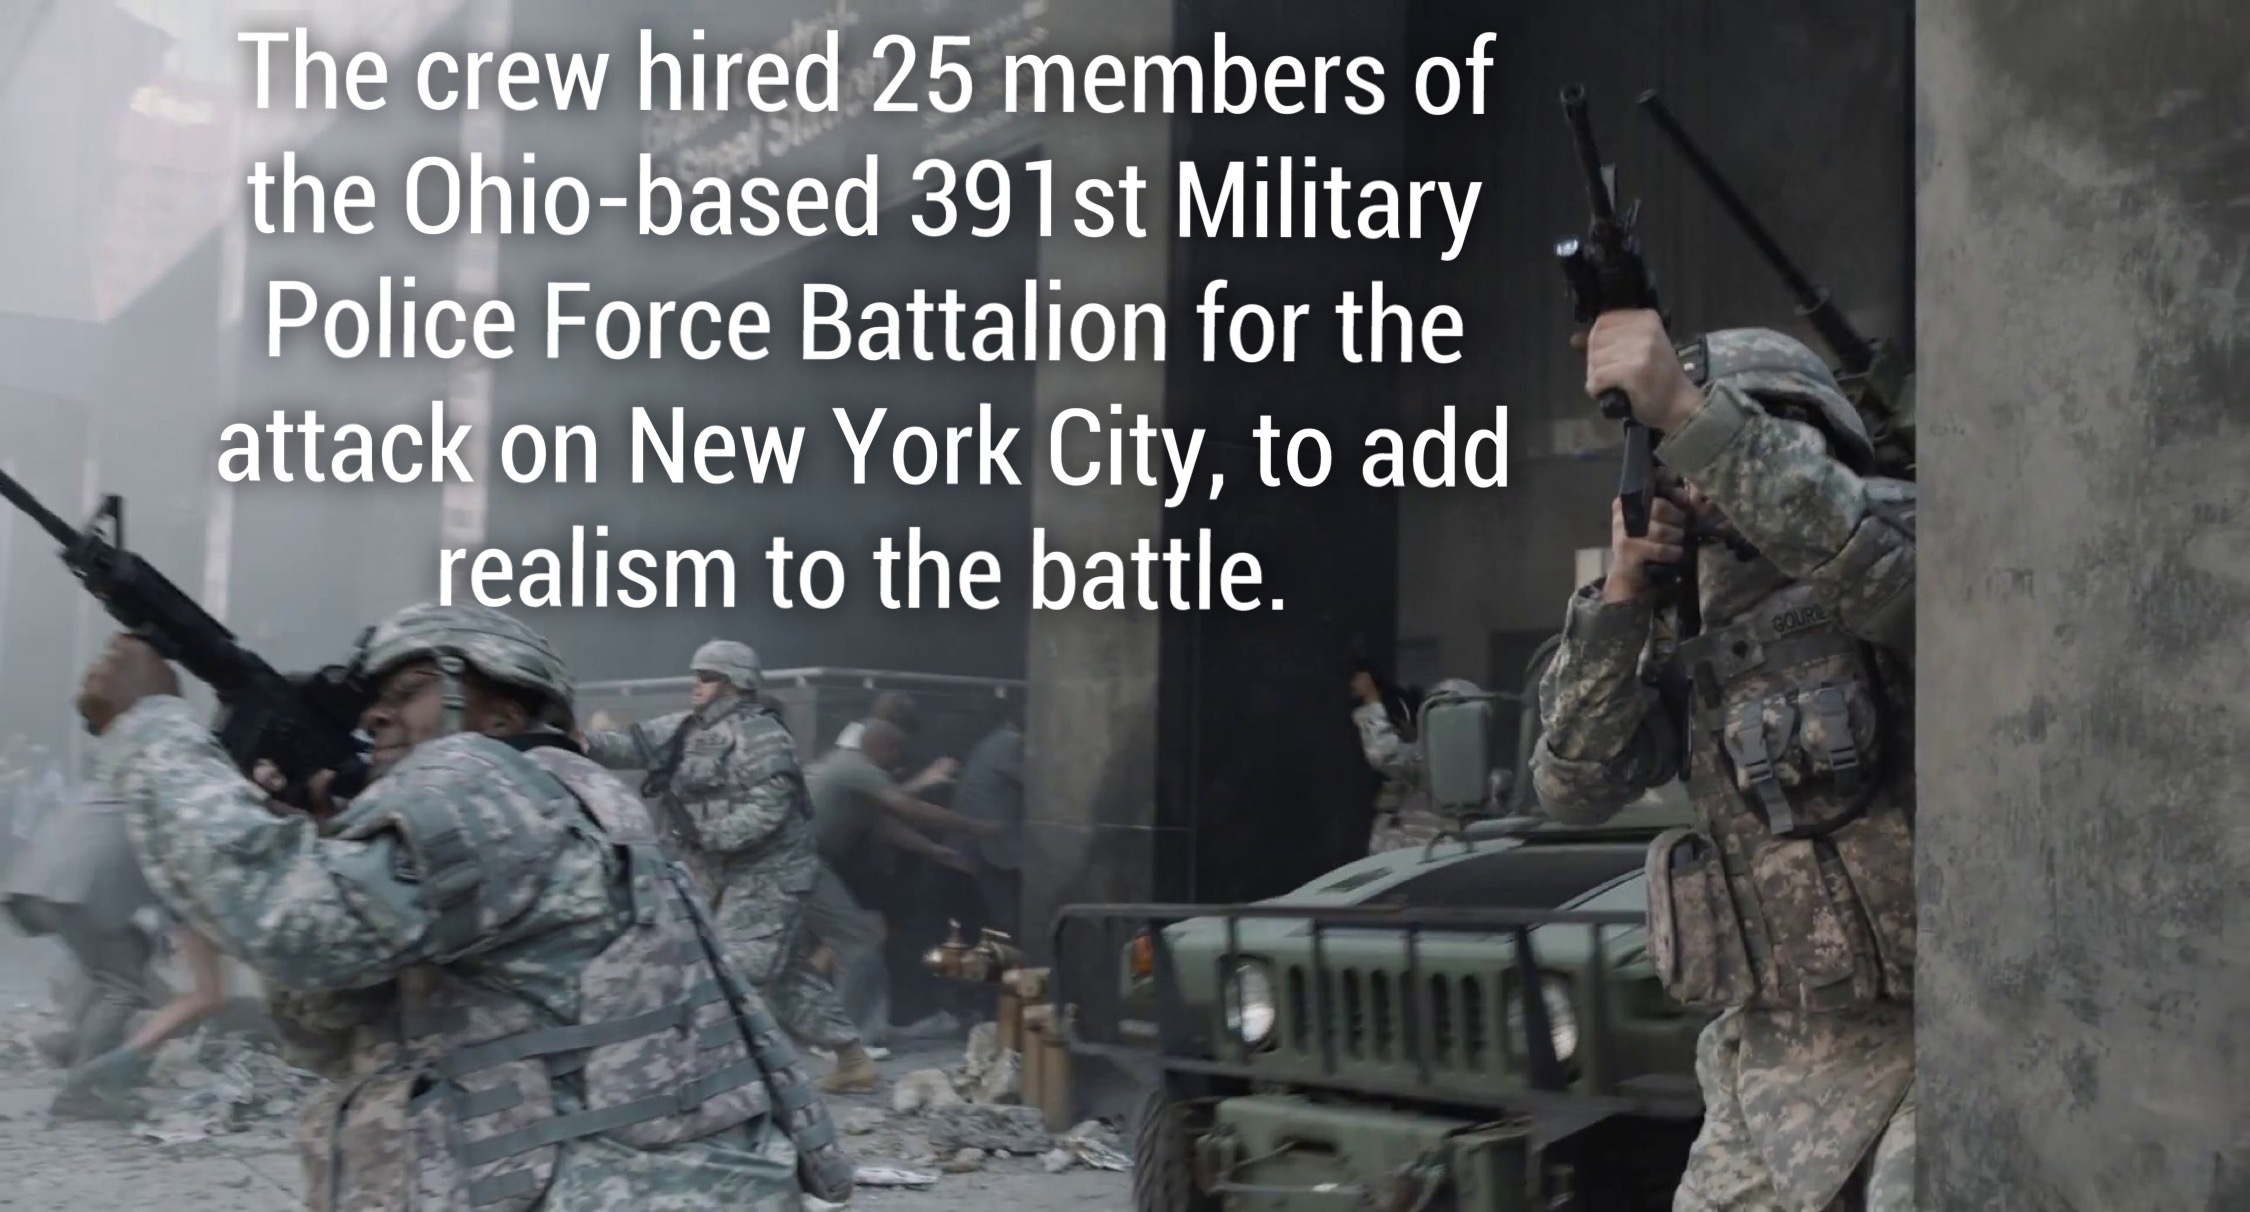 avengers 2012 national guard - The crew hired 25 members of the Ohiobased 391st Military Police Force Battalion for the attack on New York City, to add realism to the battle.